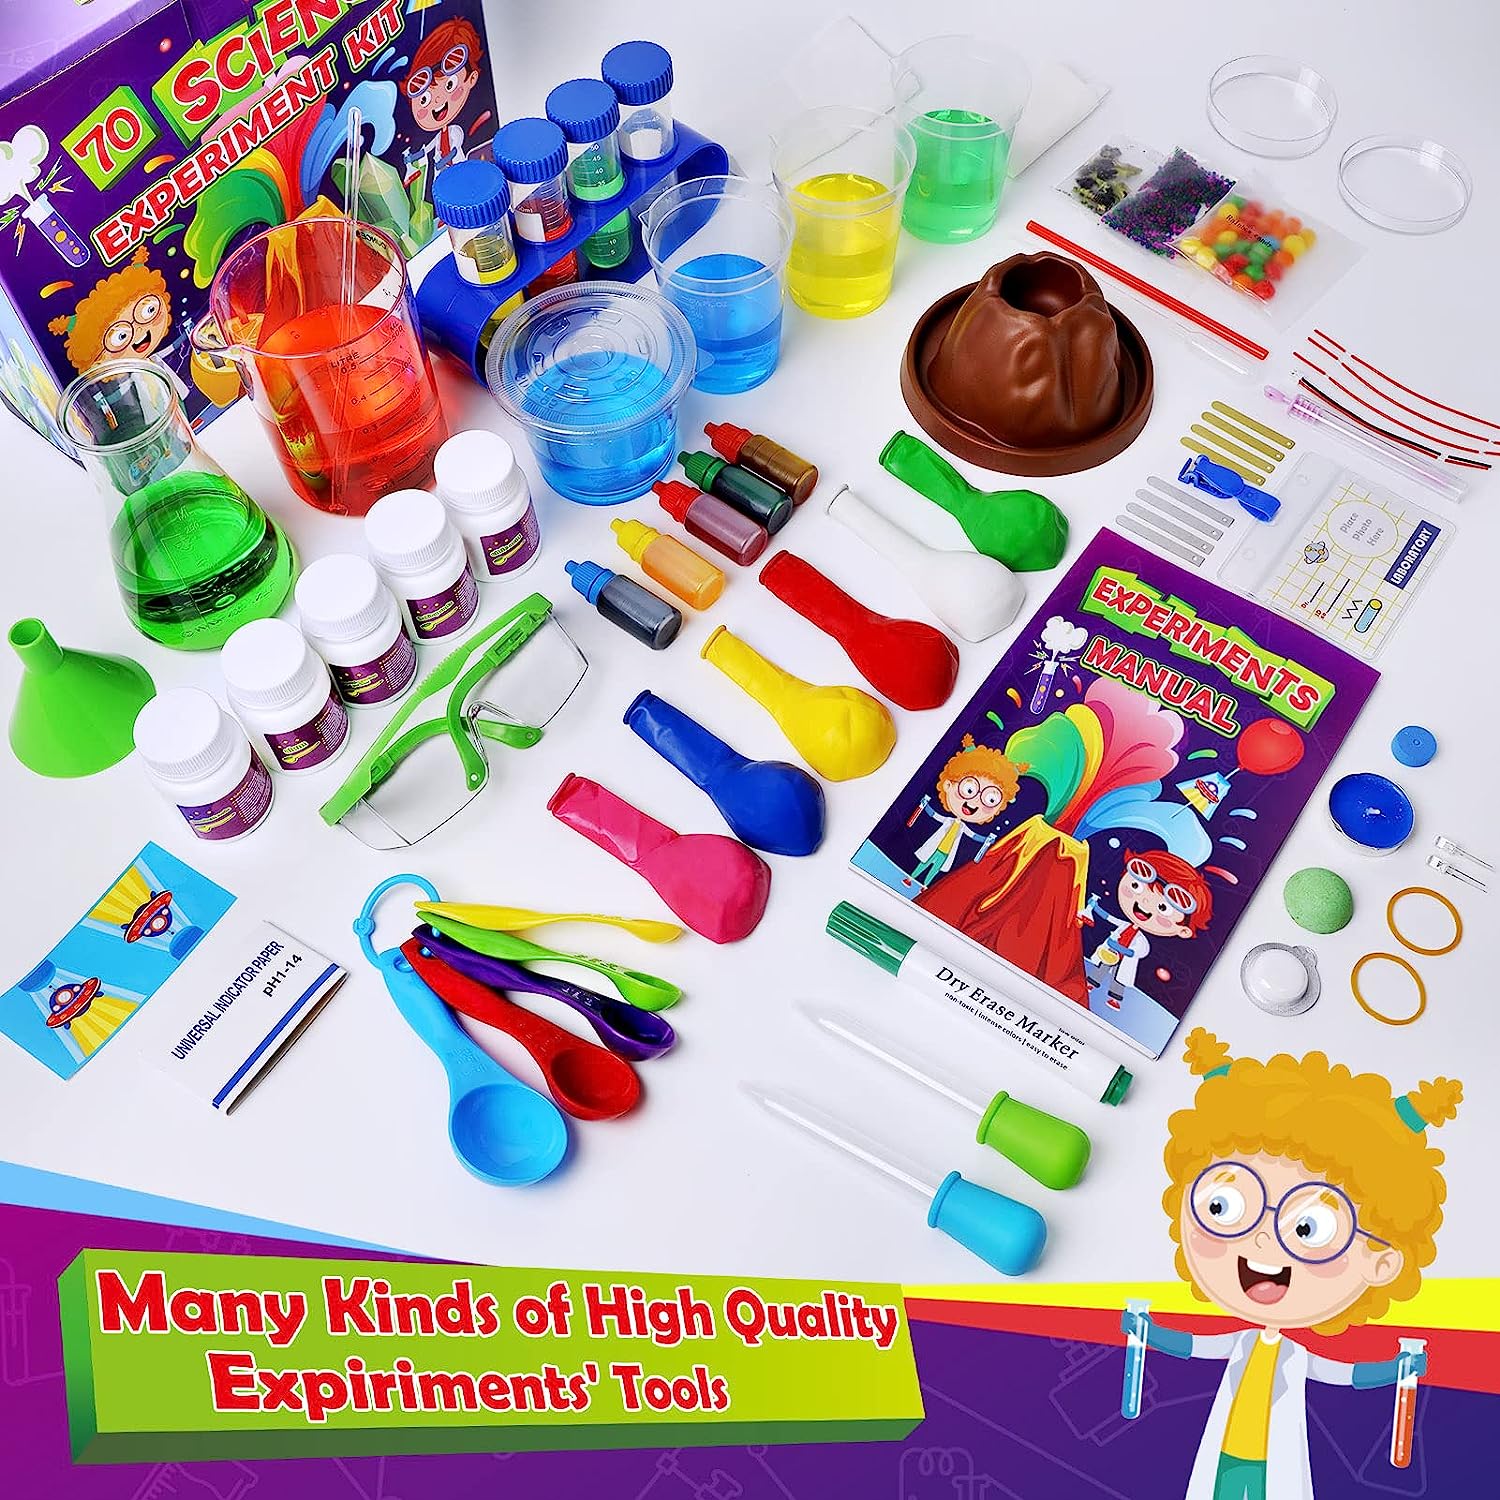 Crayola Liquid Science Kit for Kids, Water Experiments, Educational Toy,  Gift for Kids, 7, 8, 9,10